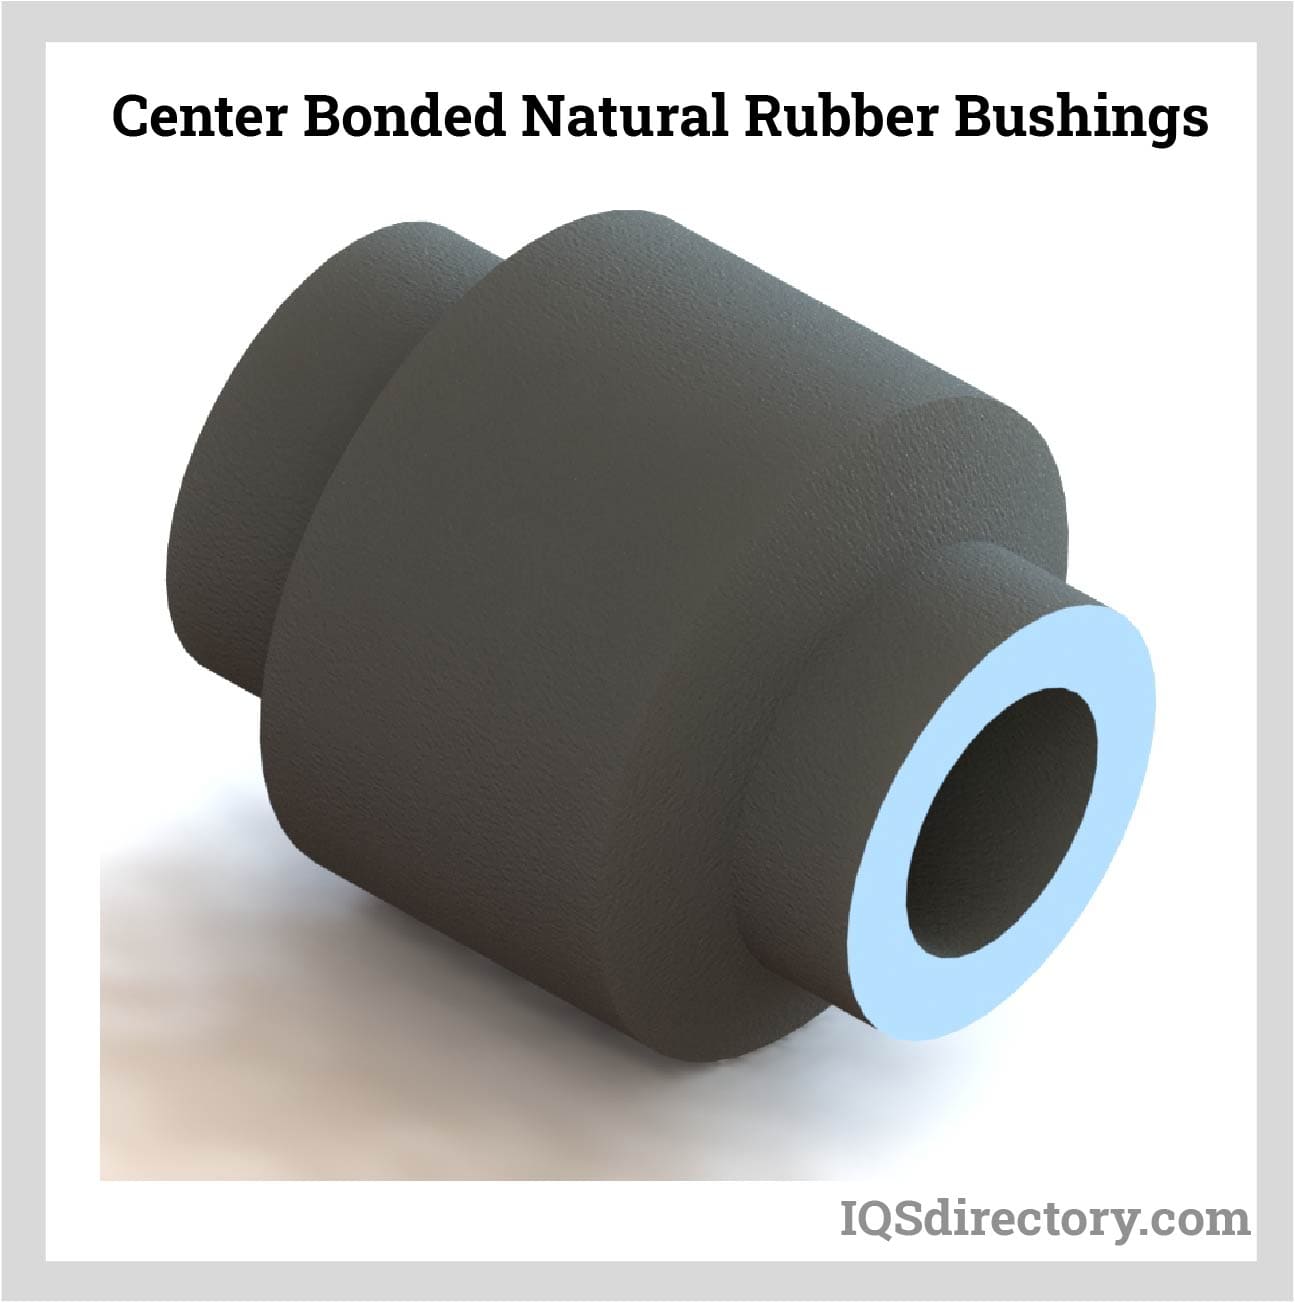 The Rubber Center